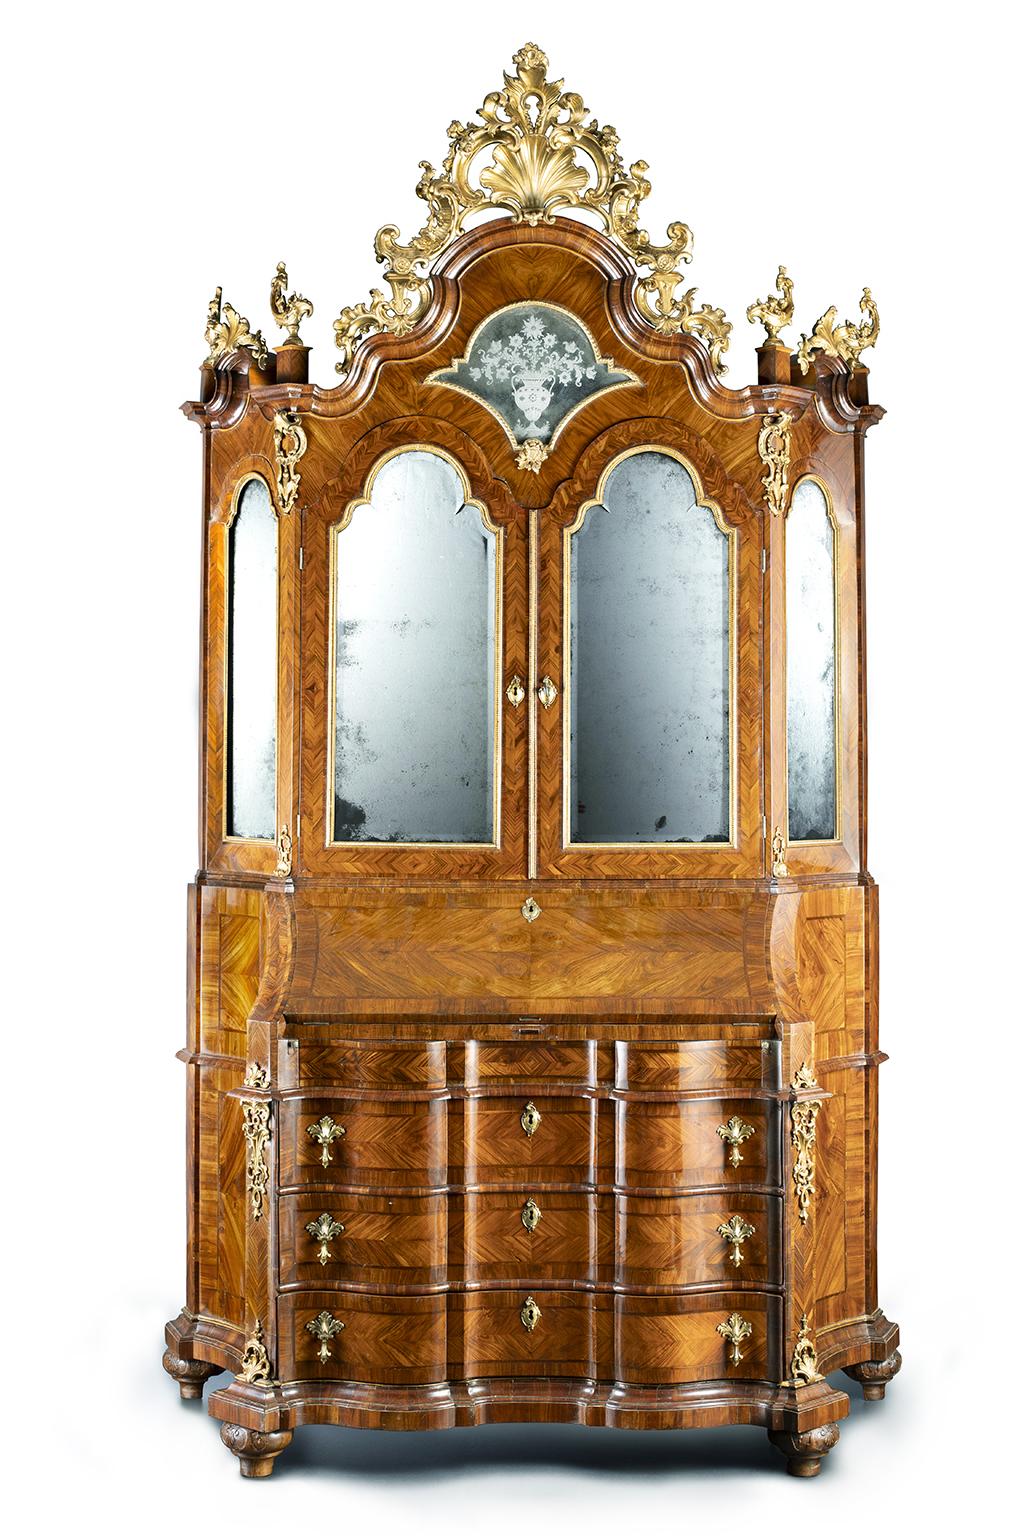 Bureau cabinet (trumeau)
Venice, circa mid-18th century
Structure made of walnut and spruce wood veneered with walnut; the decoration on the top is made of carved and gilded wood.  The mirrors are mercury-backed and the handles are made of gilded